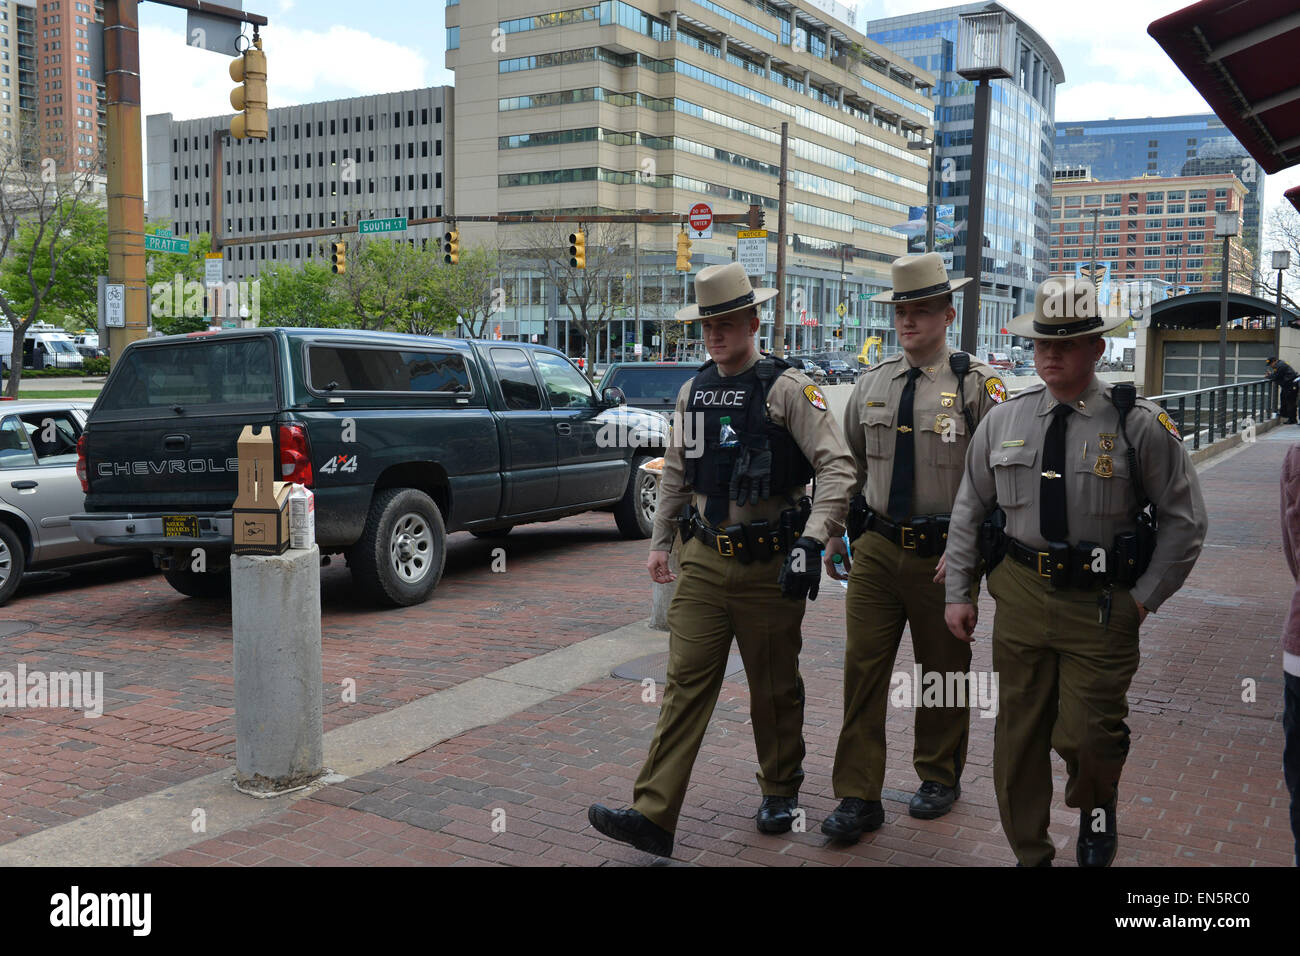 Baltimore, MD, Baltimore, Maryland, USA. 28th Apr, 2015. Maryland state troopers patrol Inner Habor, a popular Baltimore tourist area, following rioting. During a night of outrage sparked by the death of 25-year-old Freddie Gray in police custody, the city saw more than a dozen building fires, nearly 200 arrests, and 19 injured police officers. Credit:  Jay Mallin/ZUMA Wire/Alamy Live News Stock Photo